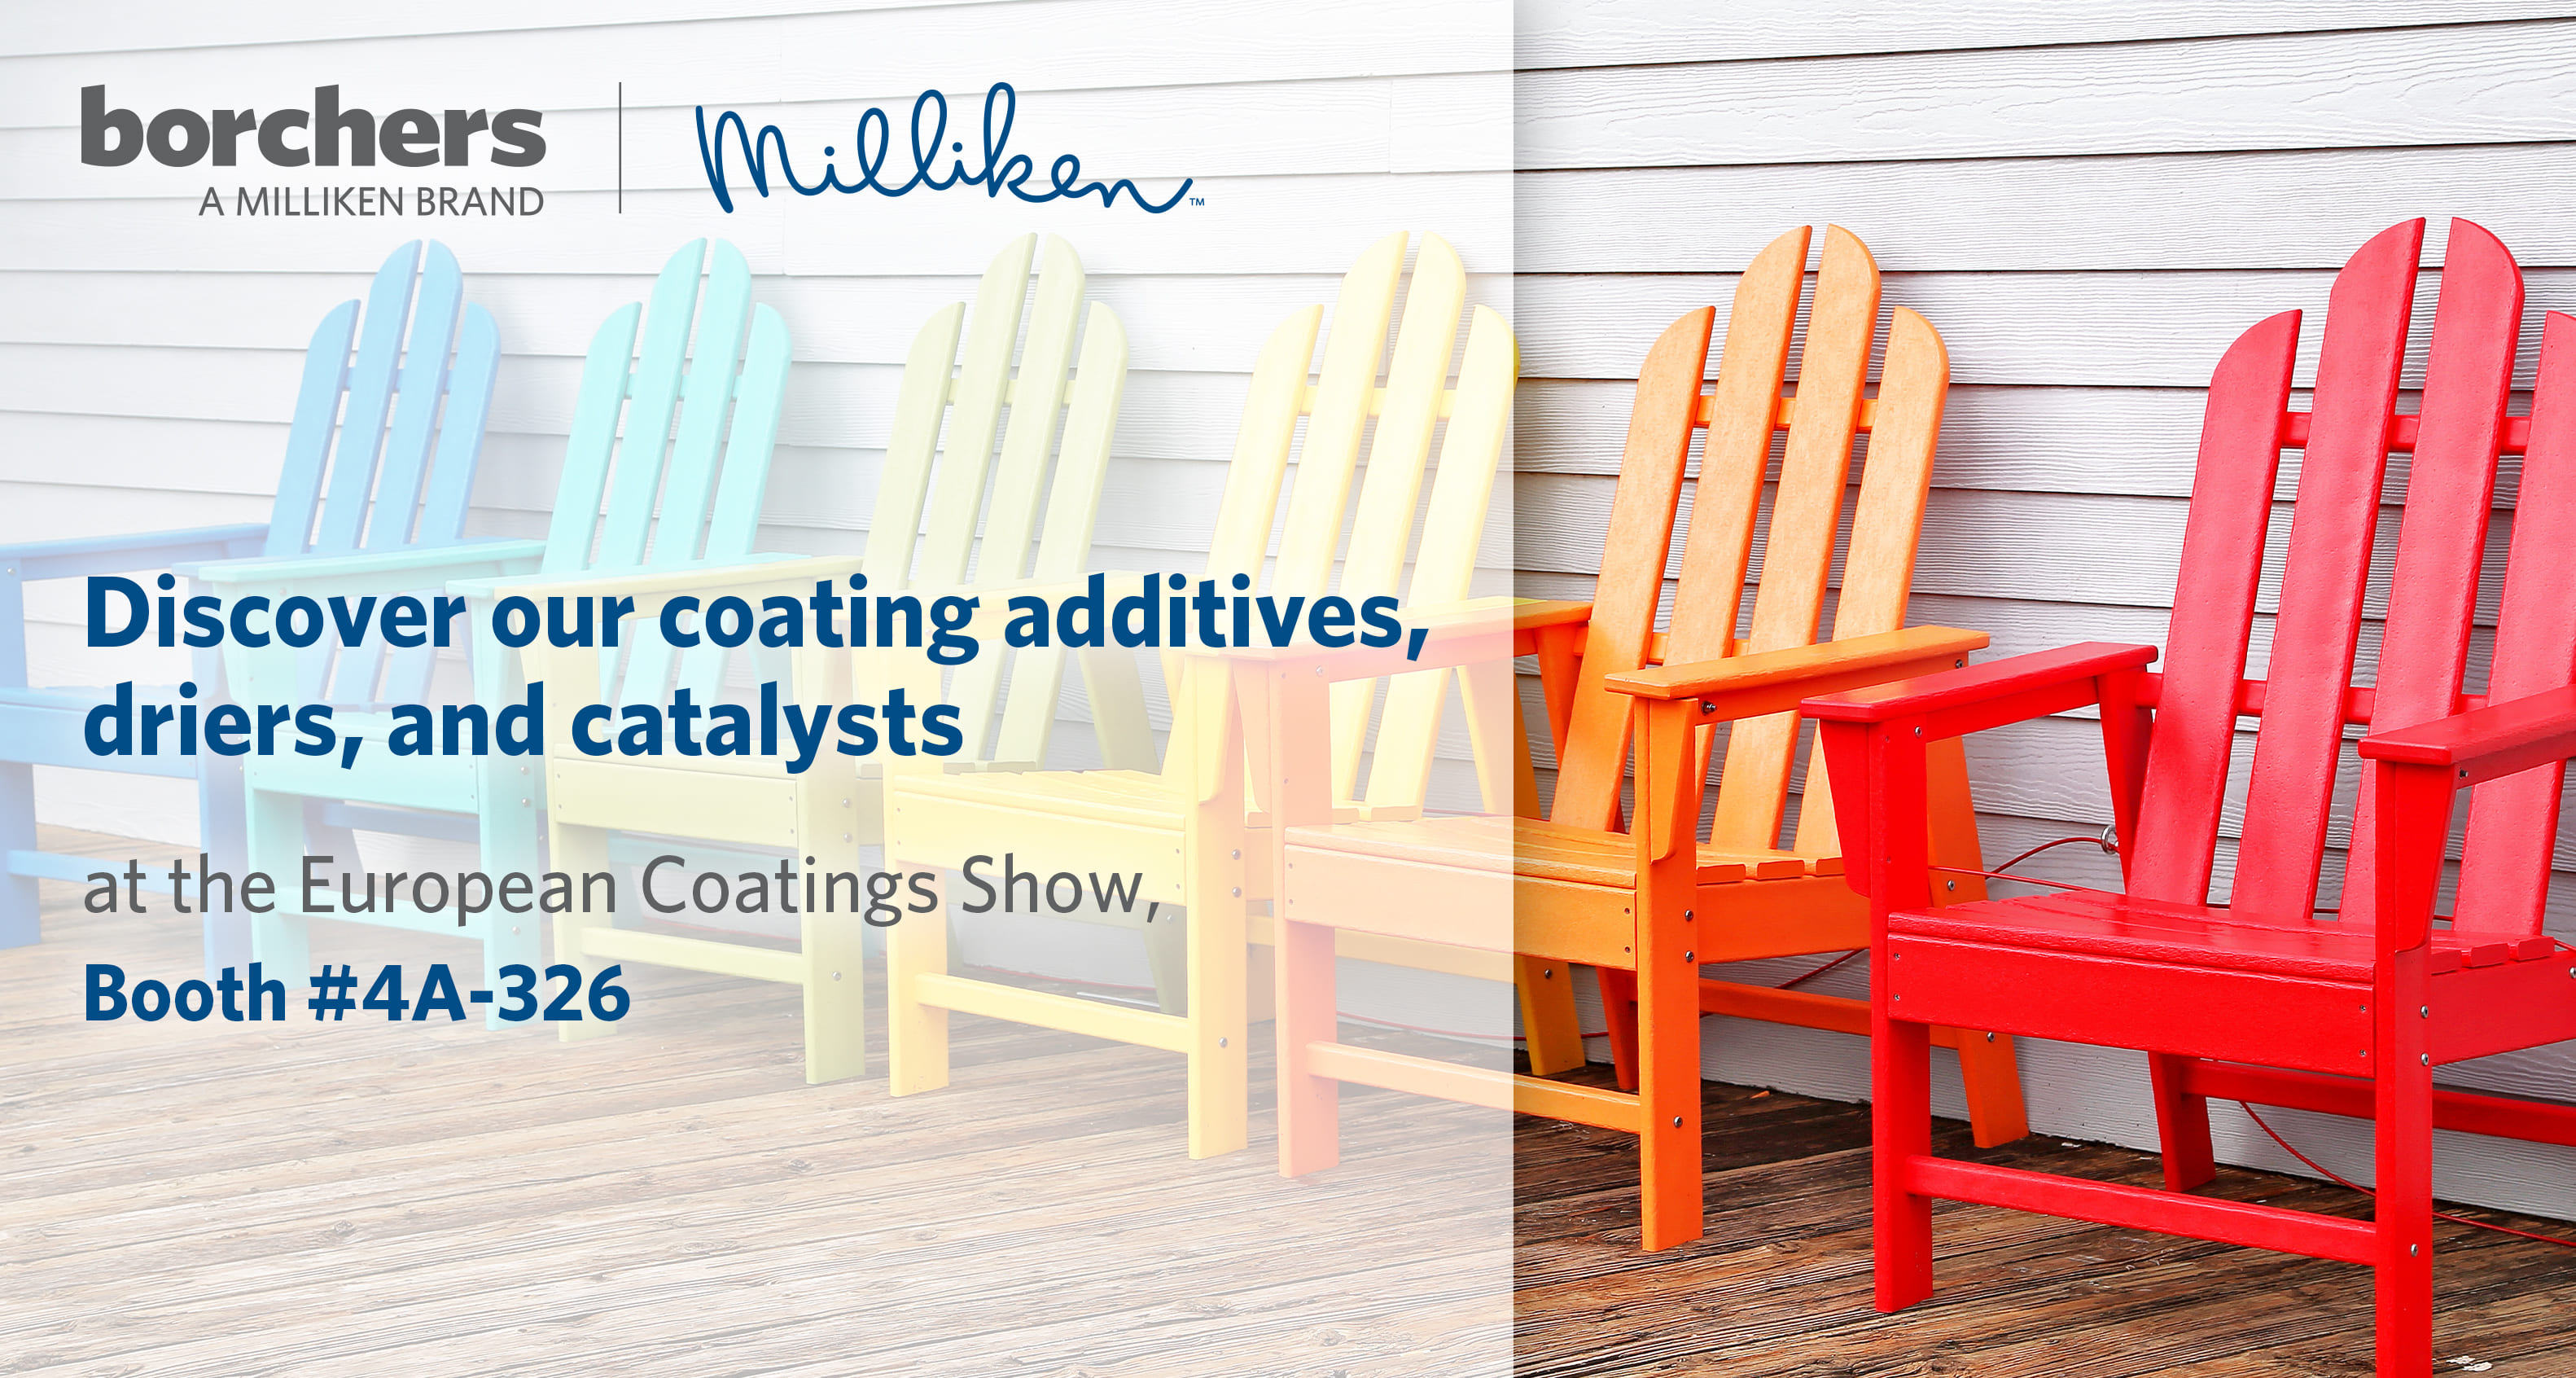 performance coating additives at the 2023 European Coatings Show